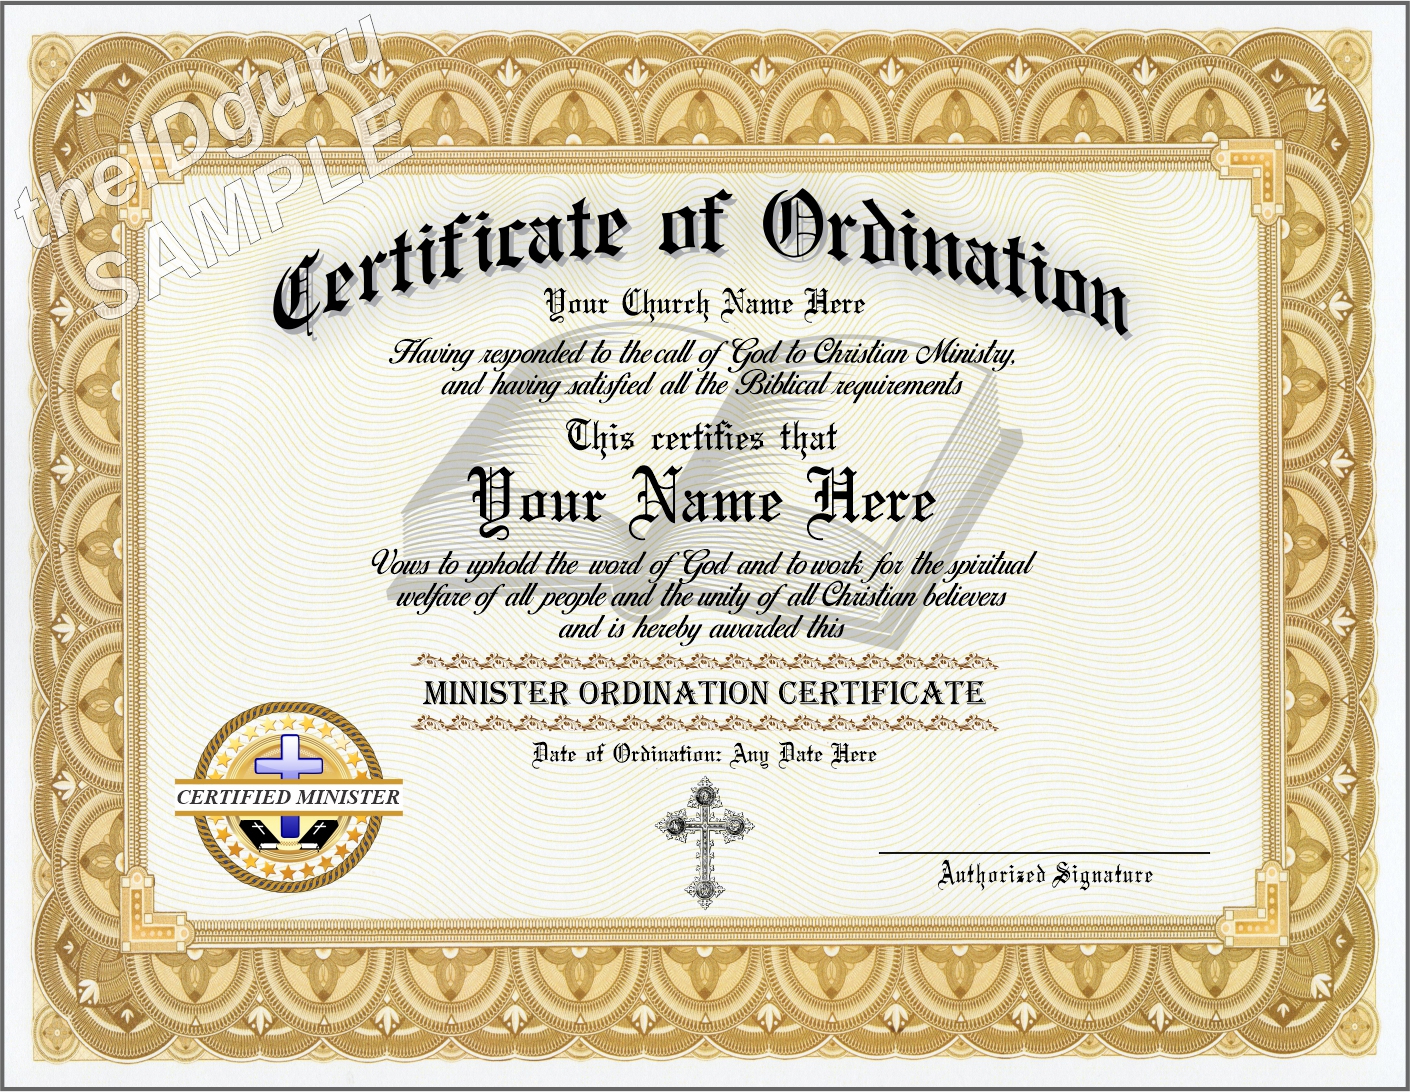 Ordained Minister License Number